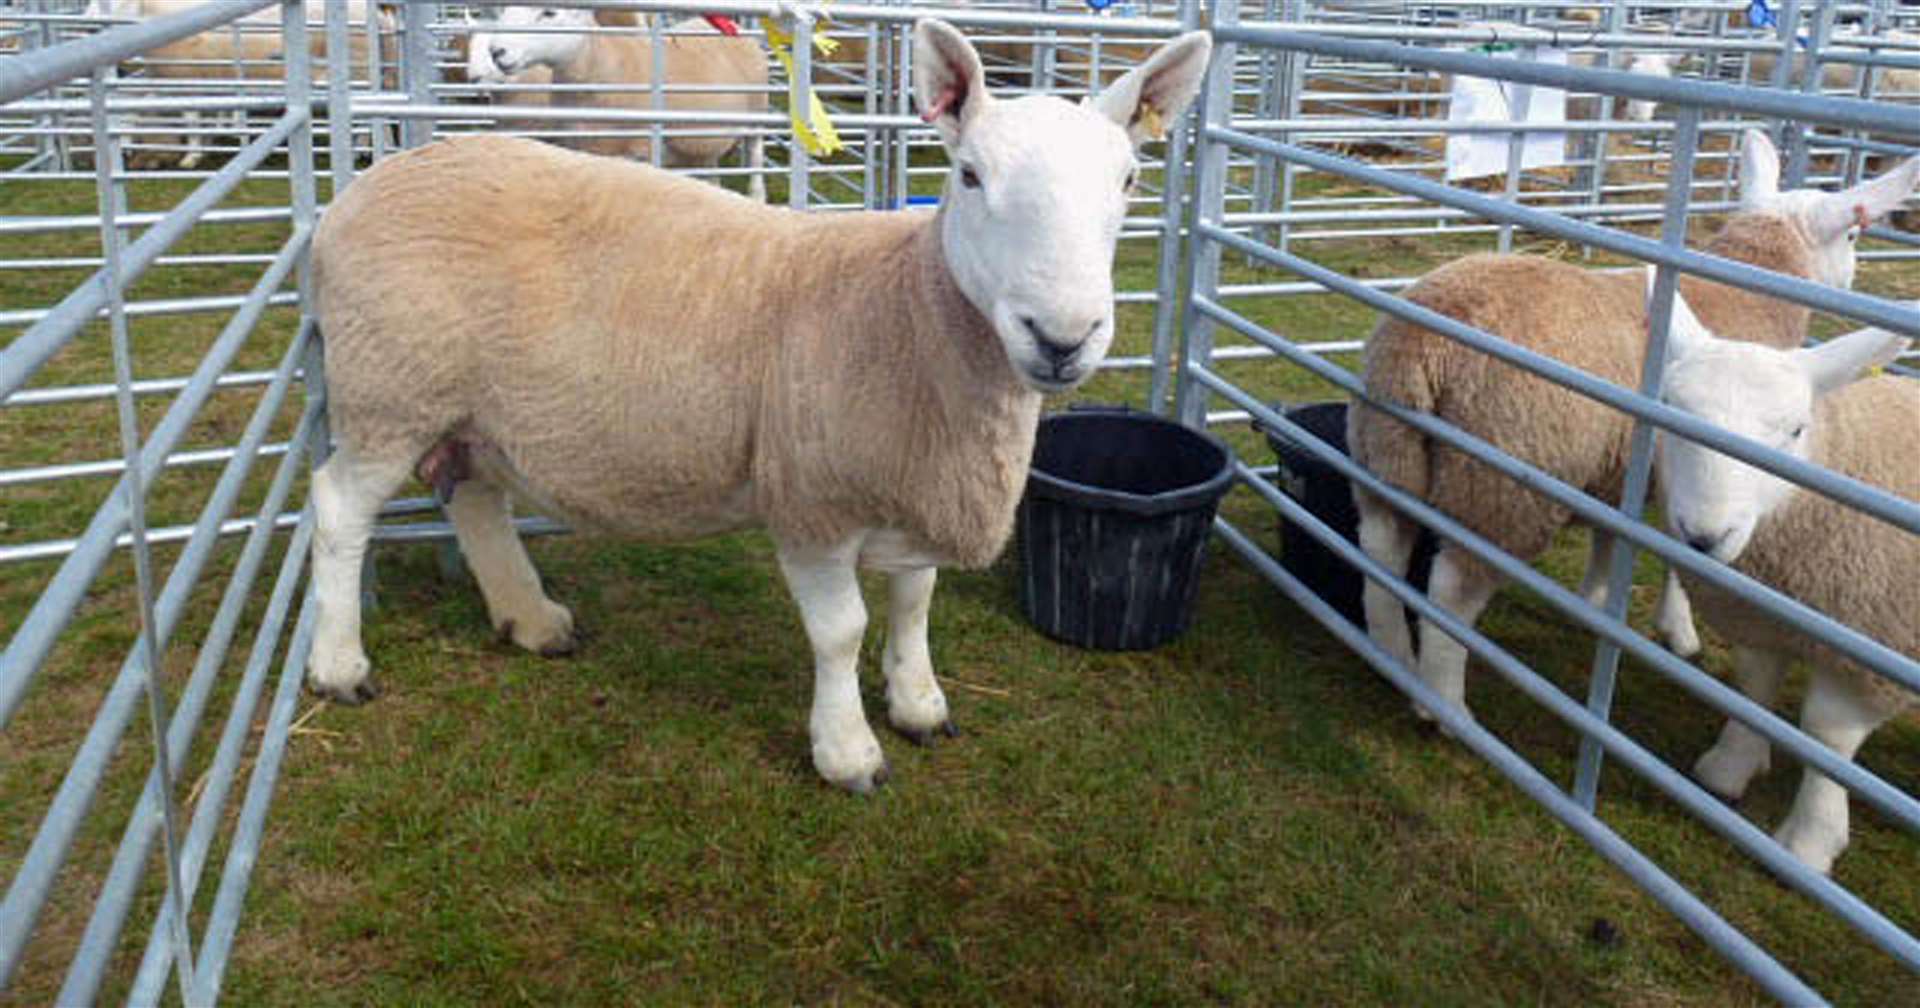 This year's County Show has been cancelled due to the coronavirus